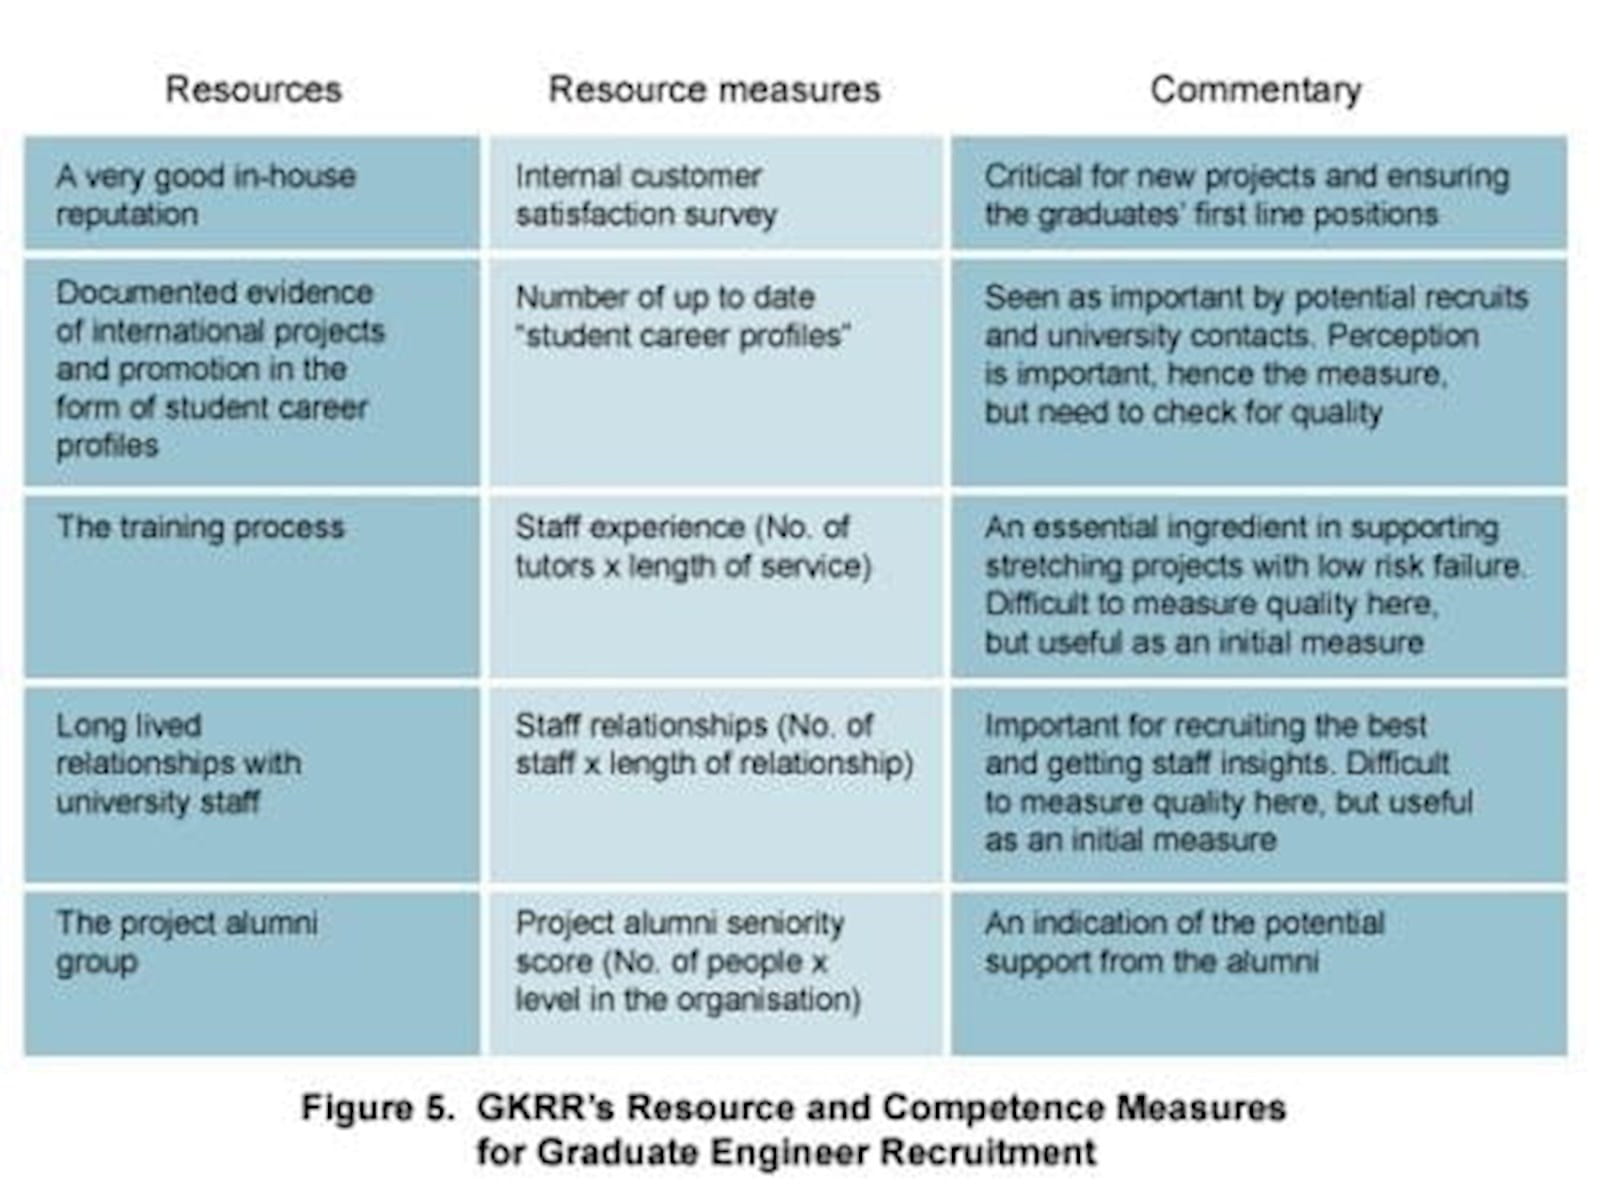 Fig 5 GKRR’s Resource and competence measures for graduate engineer recruitment